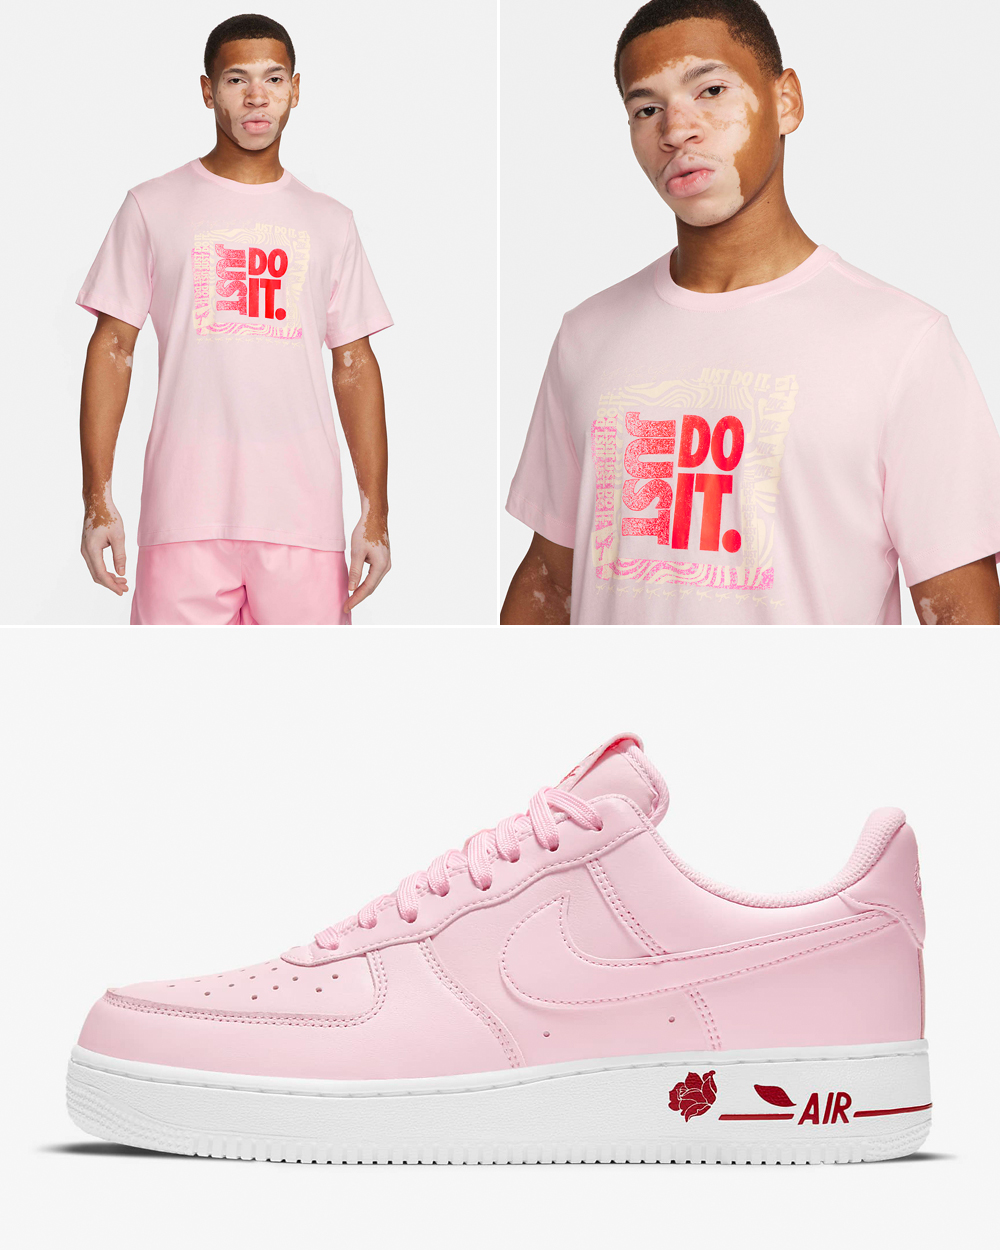 Nike-Air-Force-1-Low-Pink-Rose-Shirt-Outfit